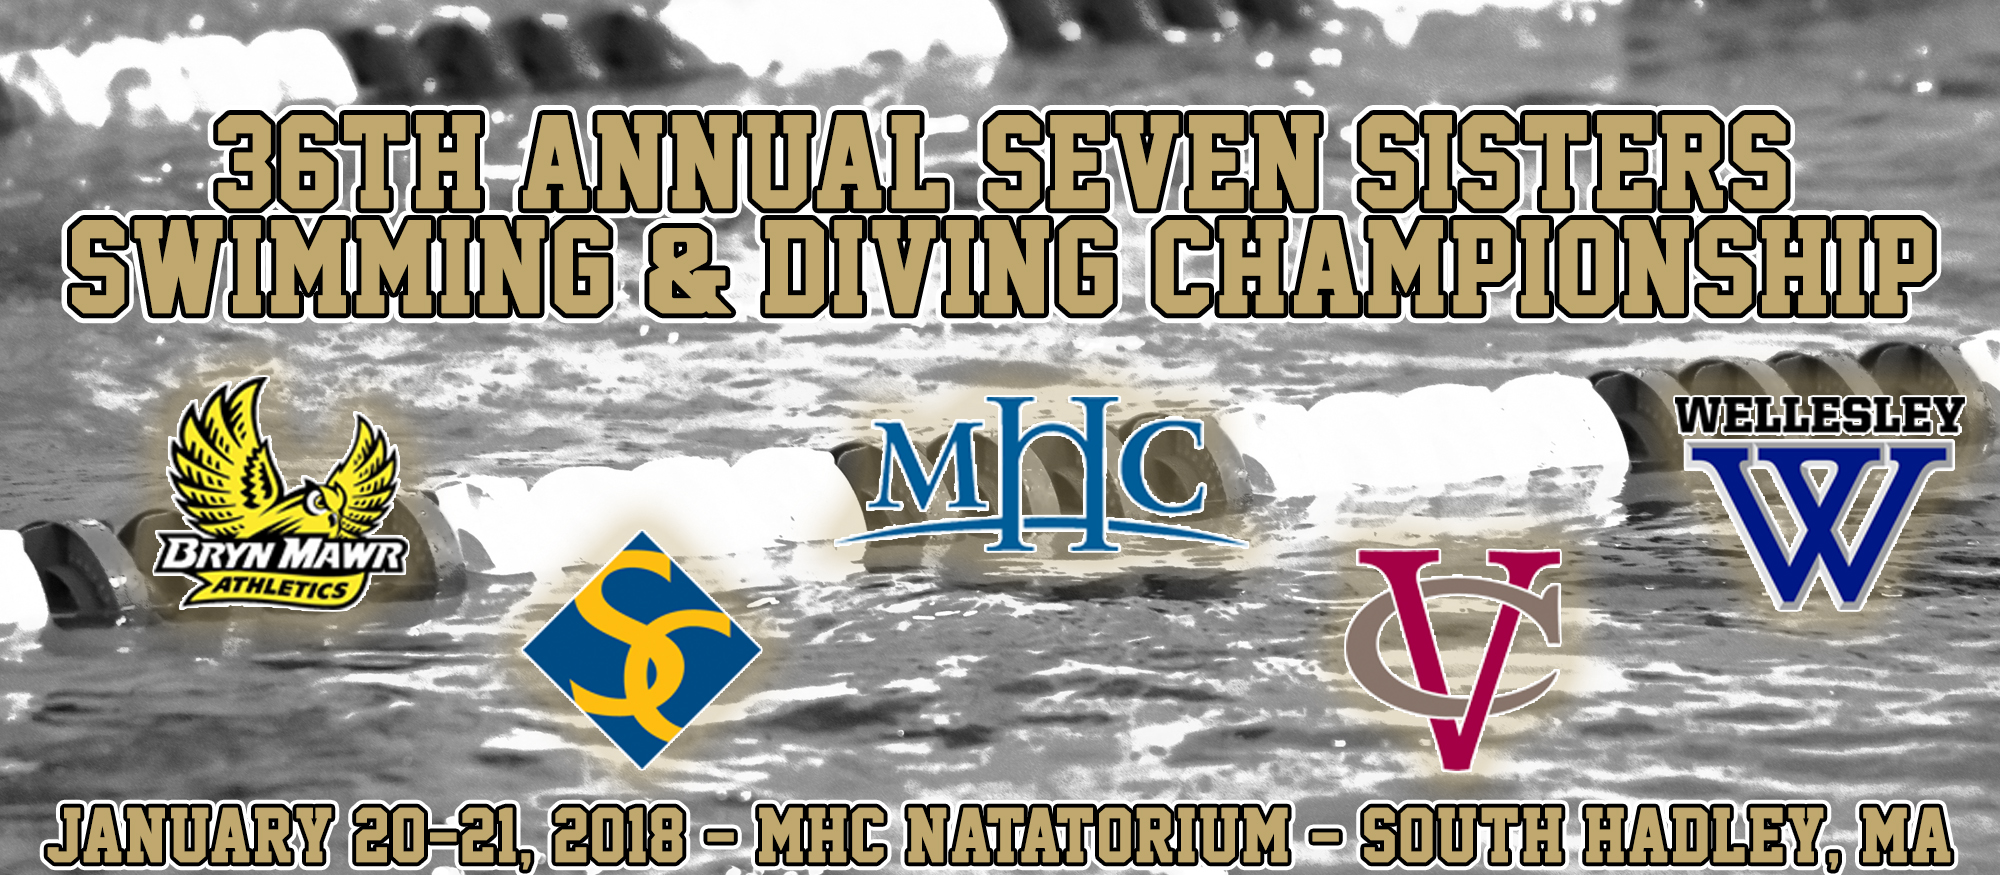 Image featuring the five participating schools in the 2018 Seven Sisters Championship, including Bryn Mawr, Smith, Mount Holyoke, Vassar and Wellesley. Set to run Jan. 20-21, 2018 at MHC.